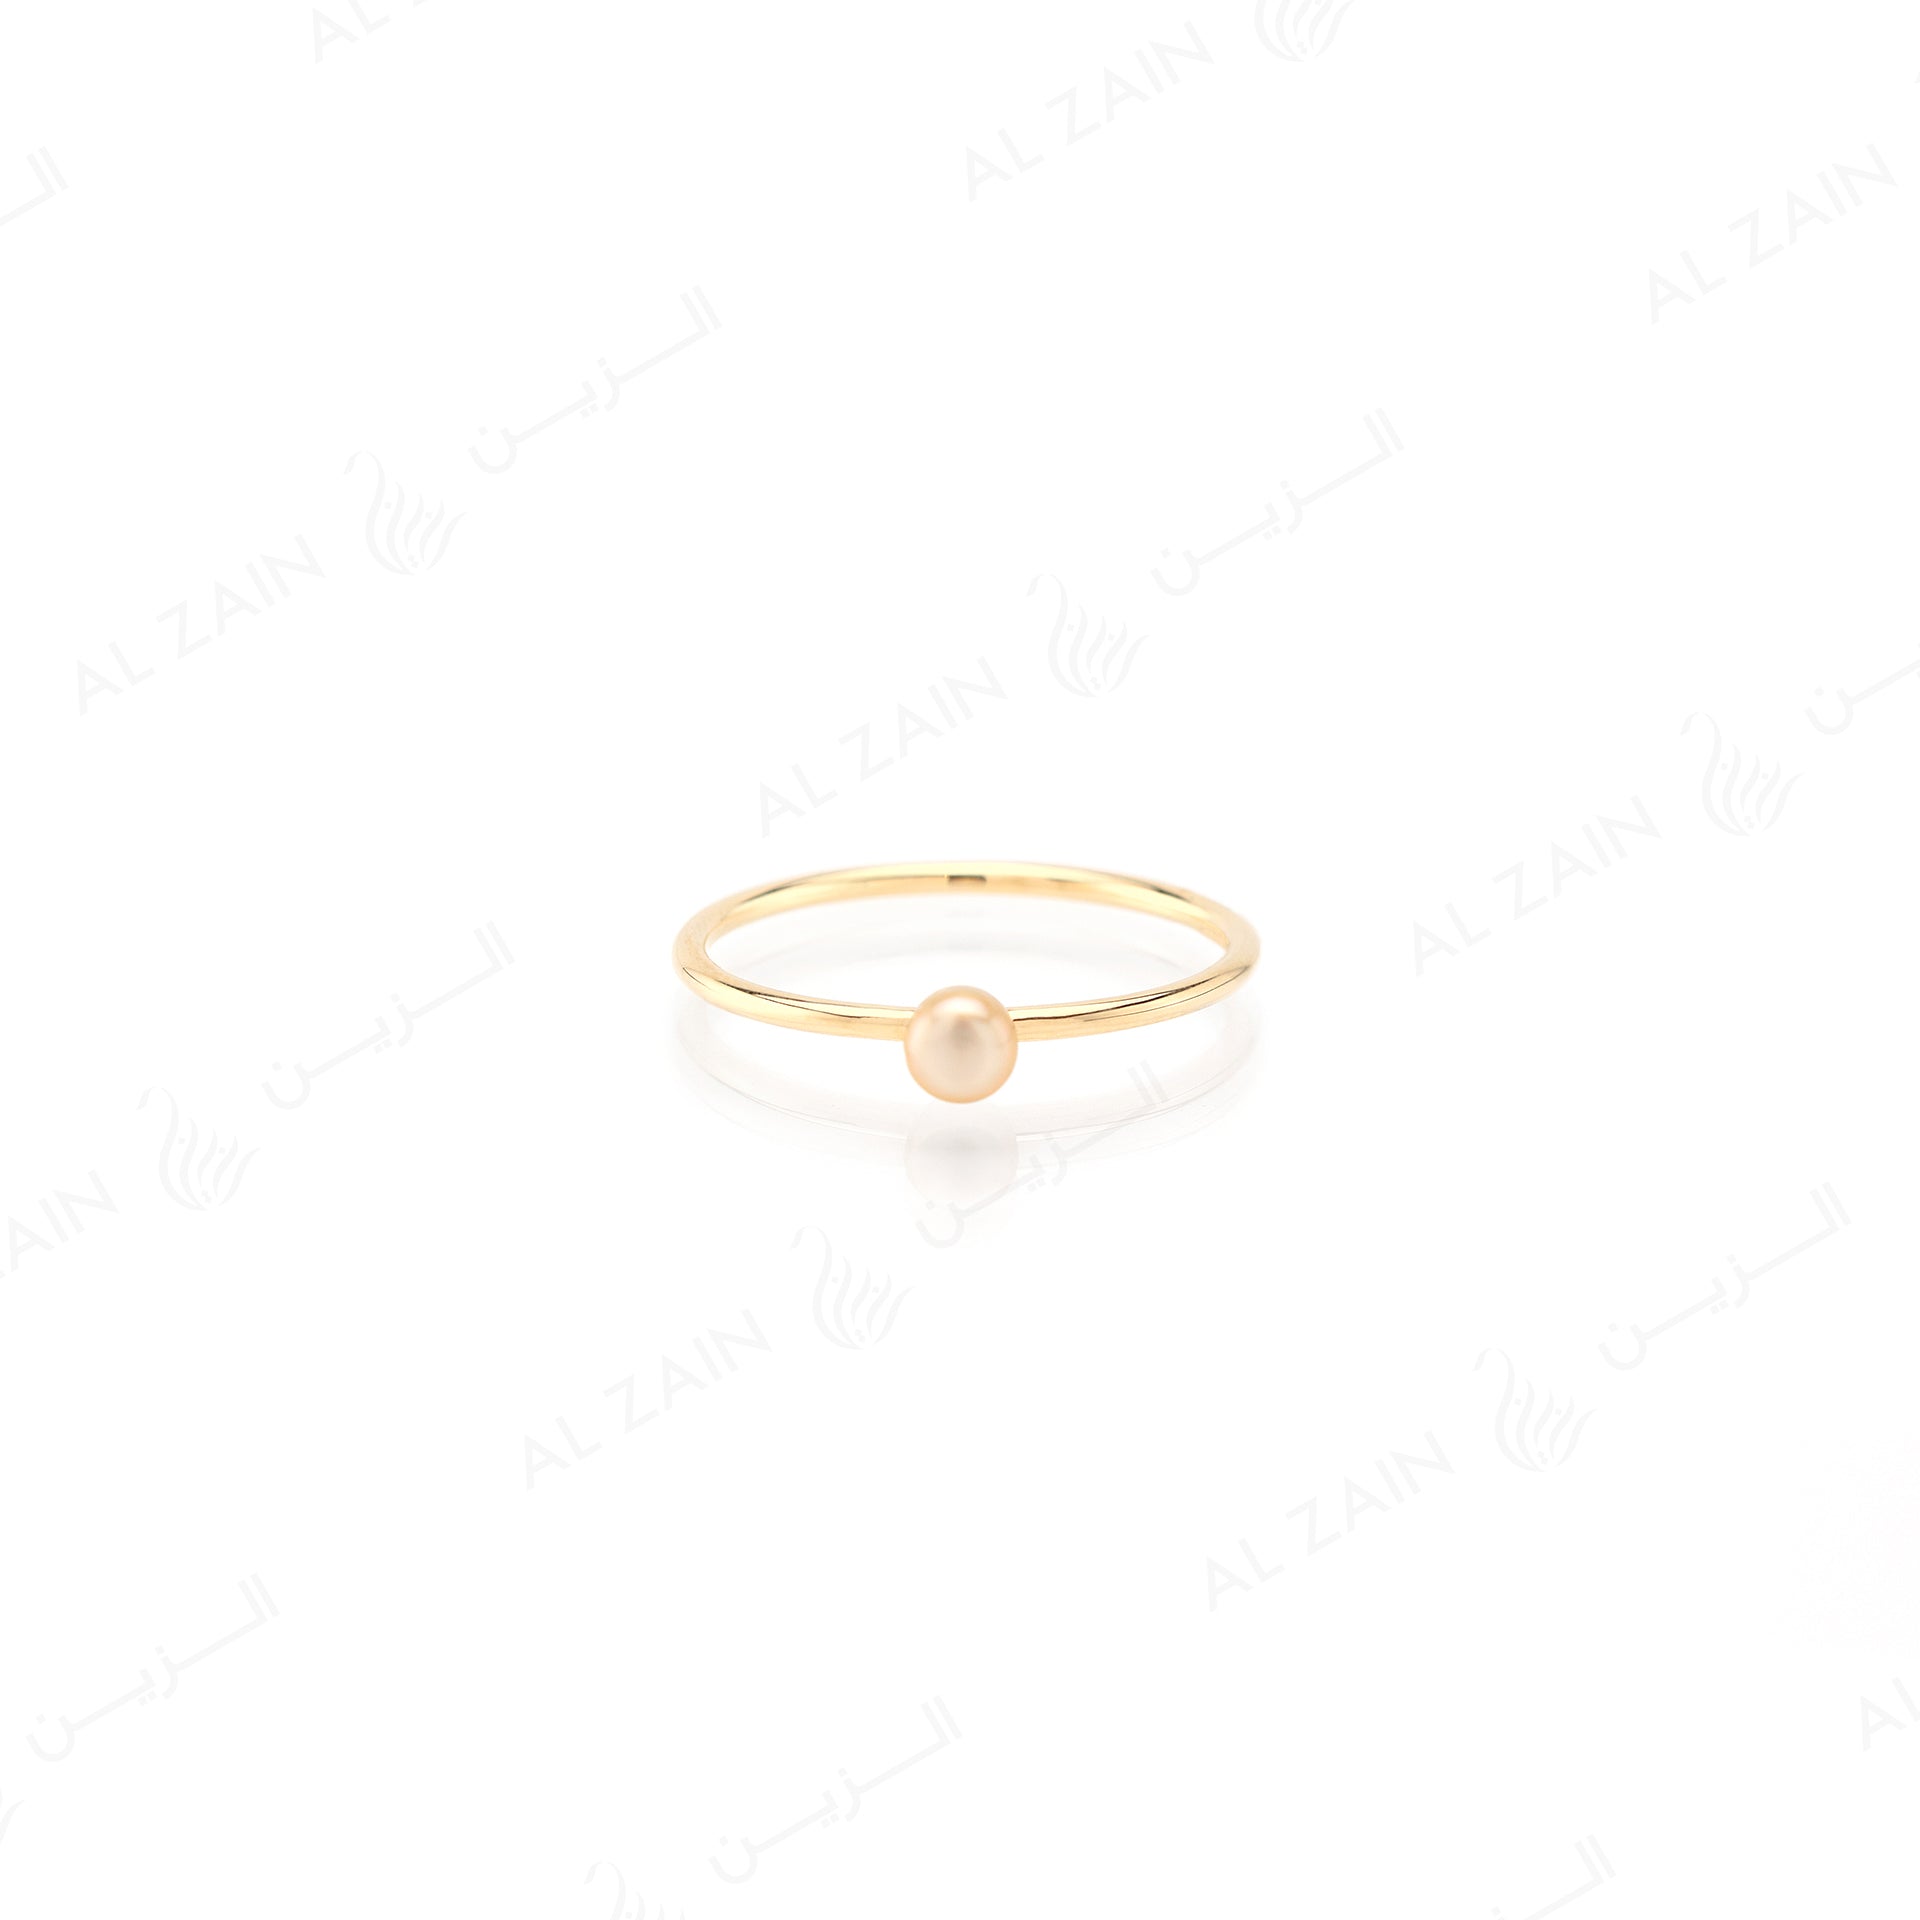 Mystique ring collection with natural pearl in yellow gold